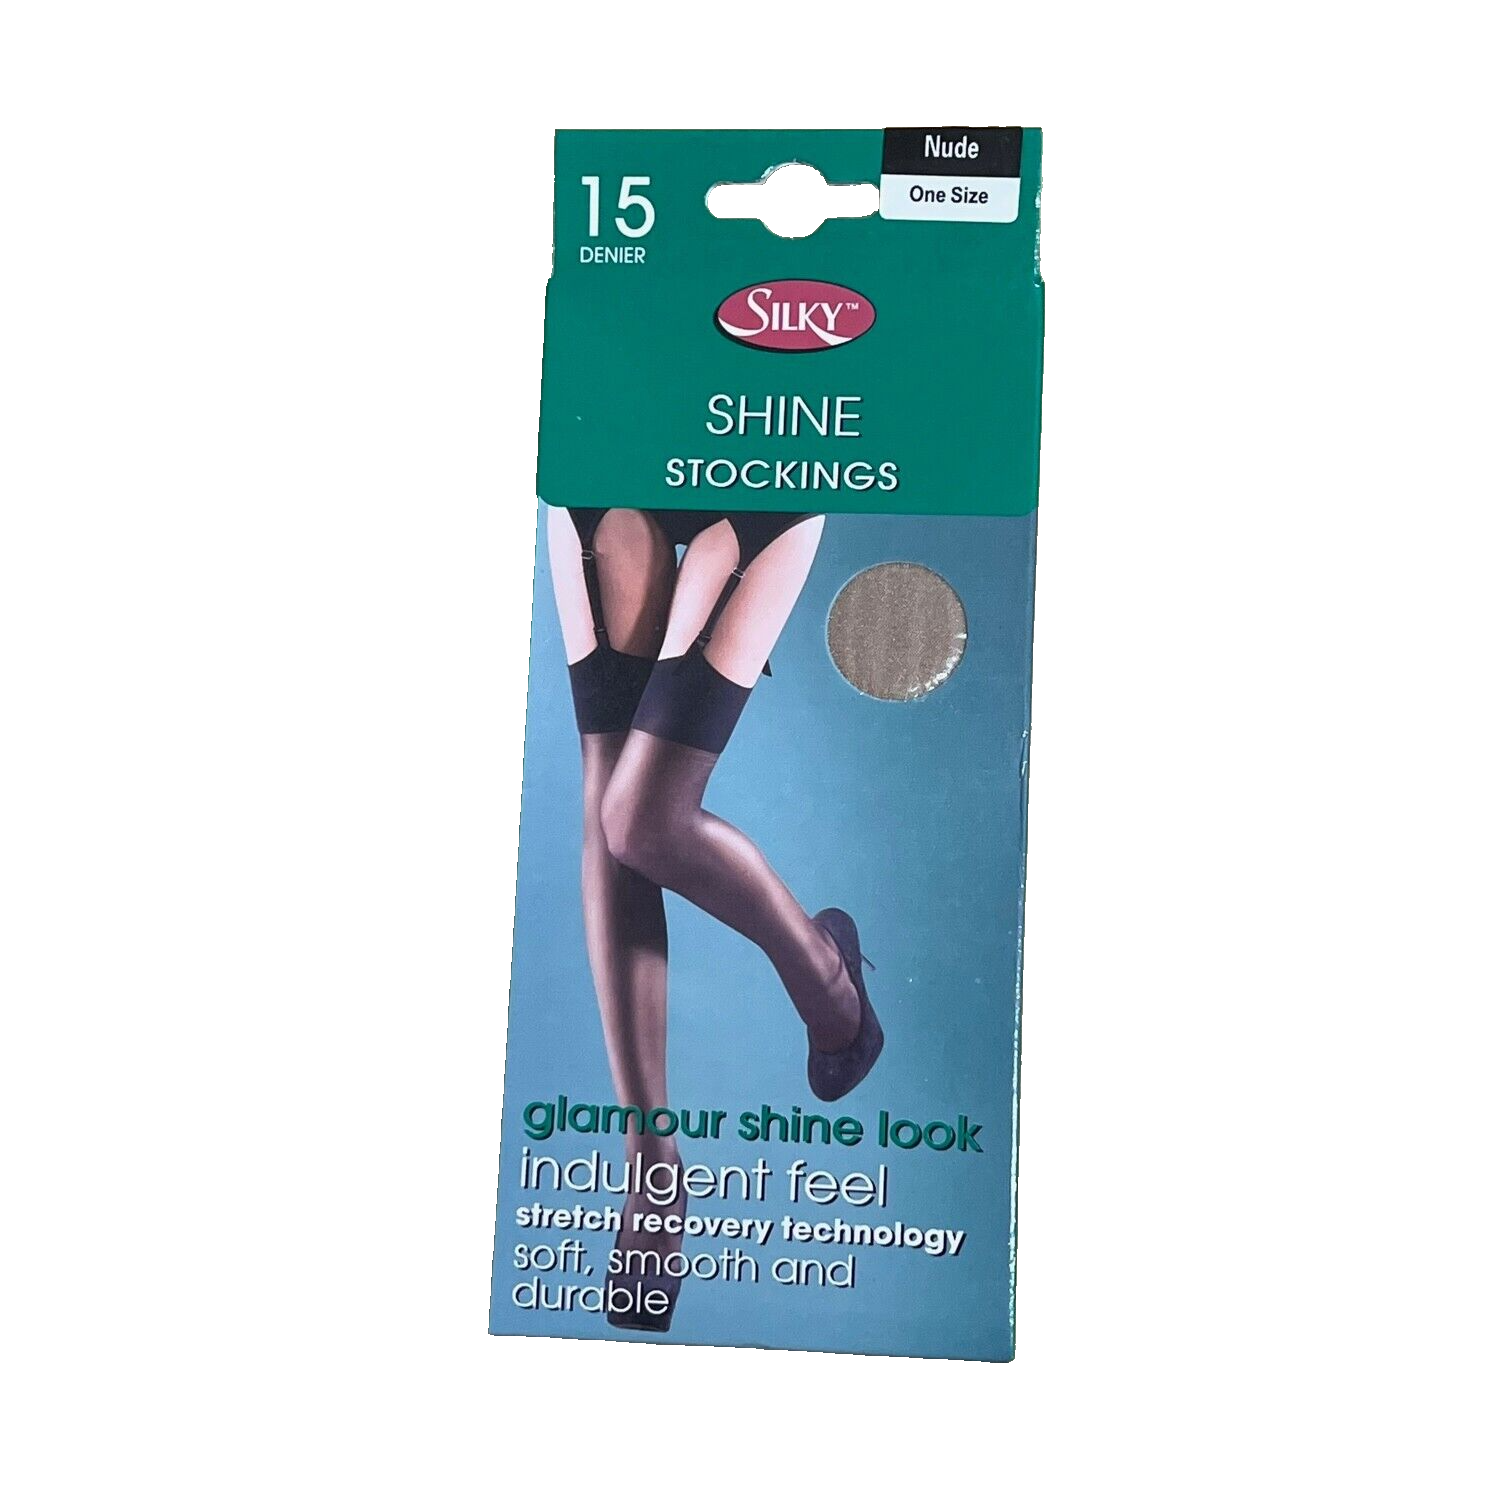 Ladies Silky Nude Super Shine Look Soft Smooth Stockings 15 Denier One Size